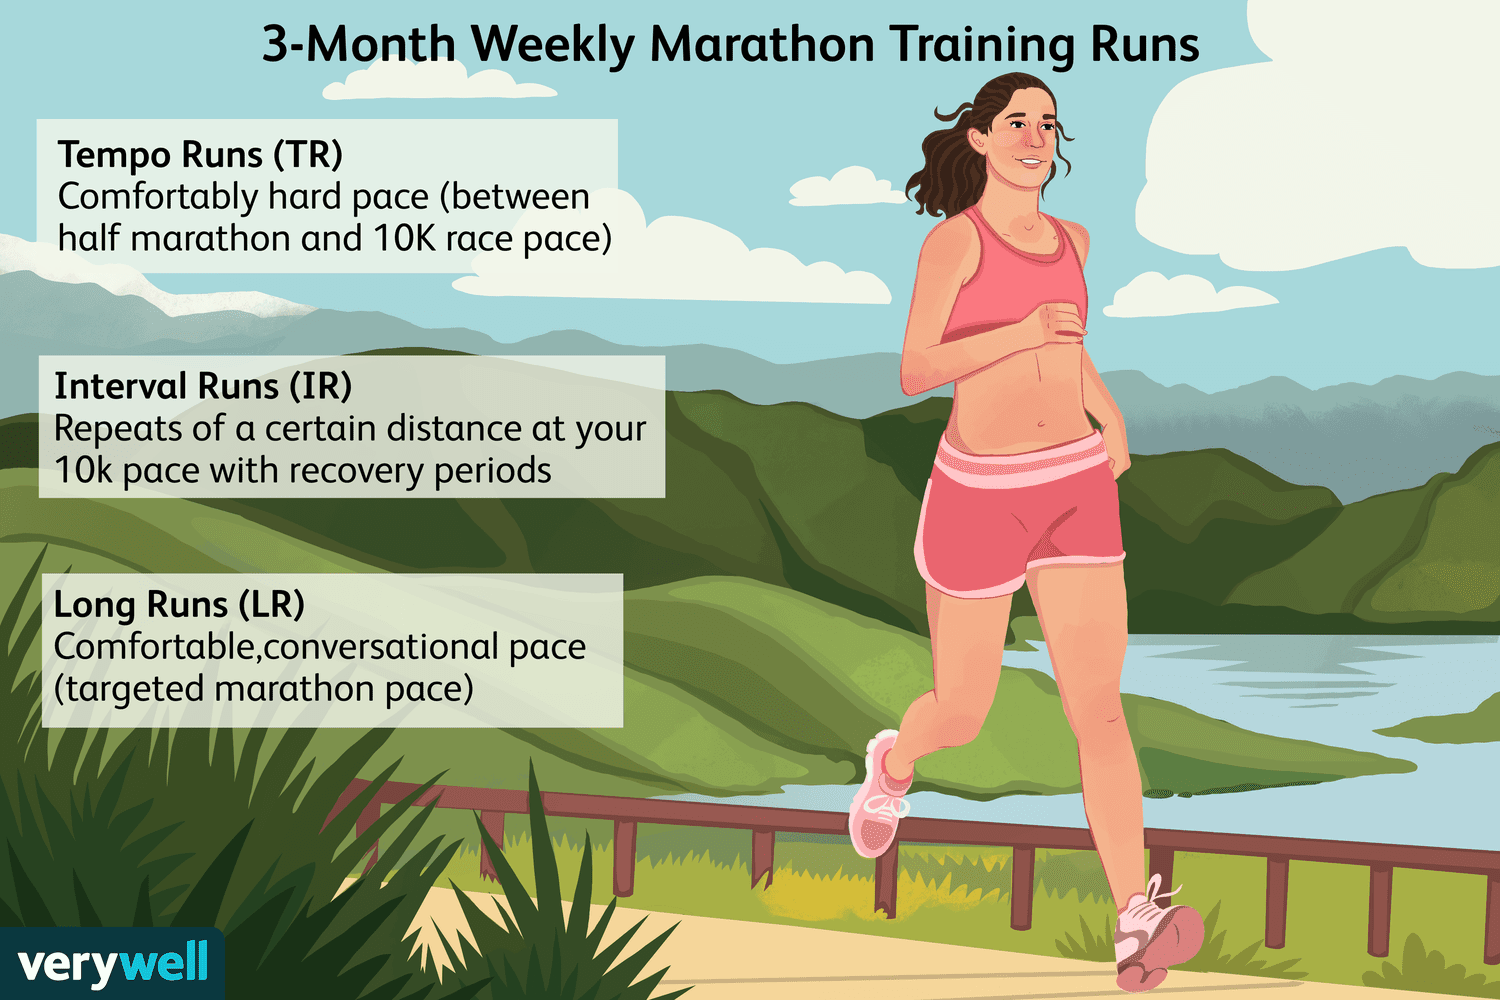 How Hard was It to Train for a Marathon?